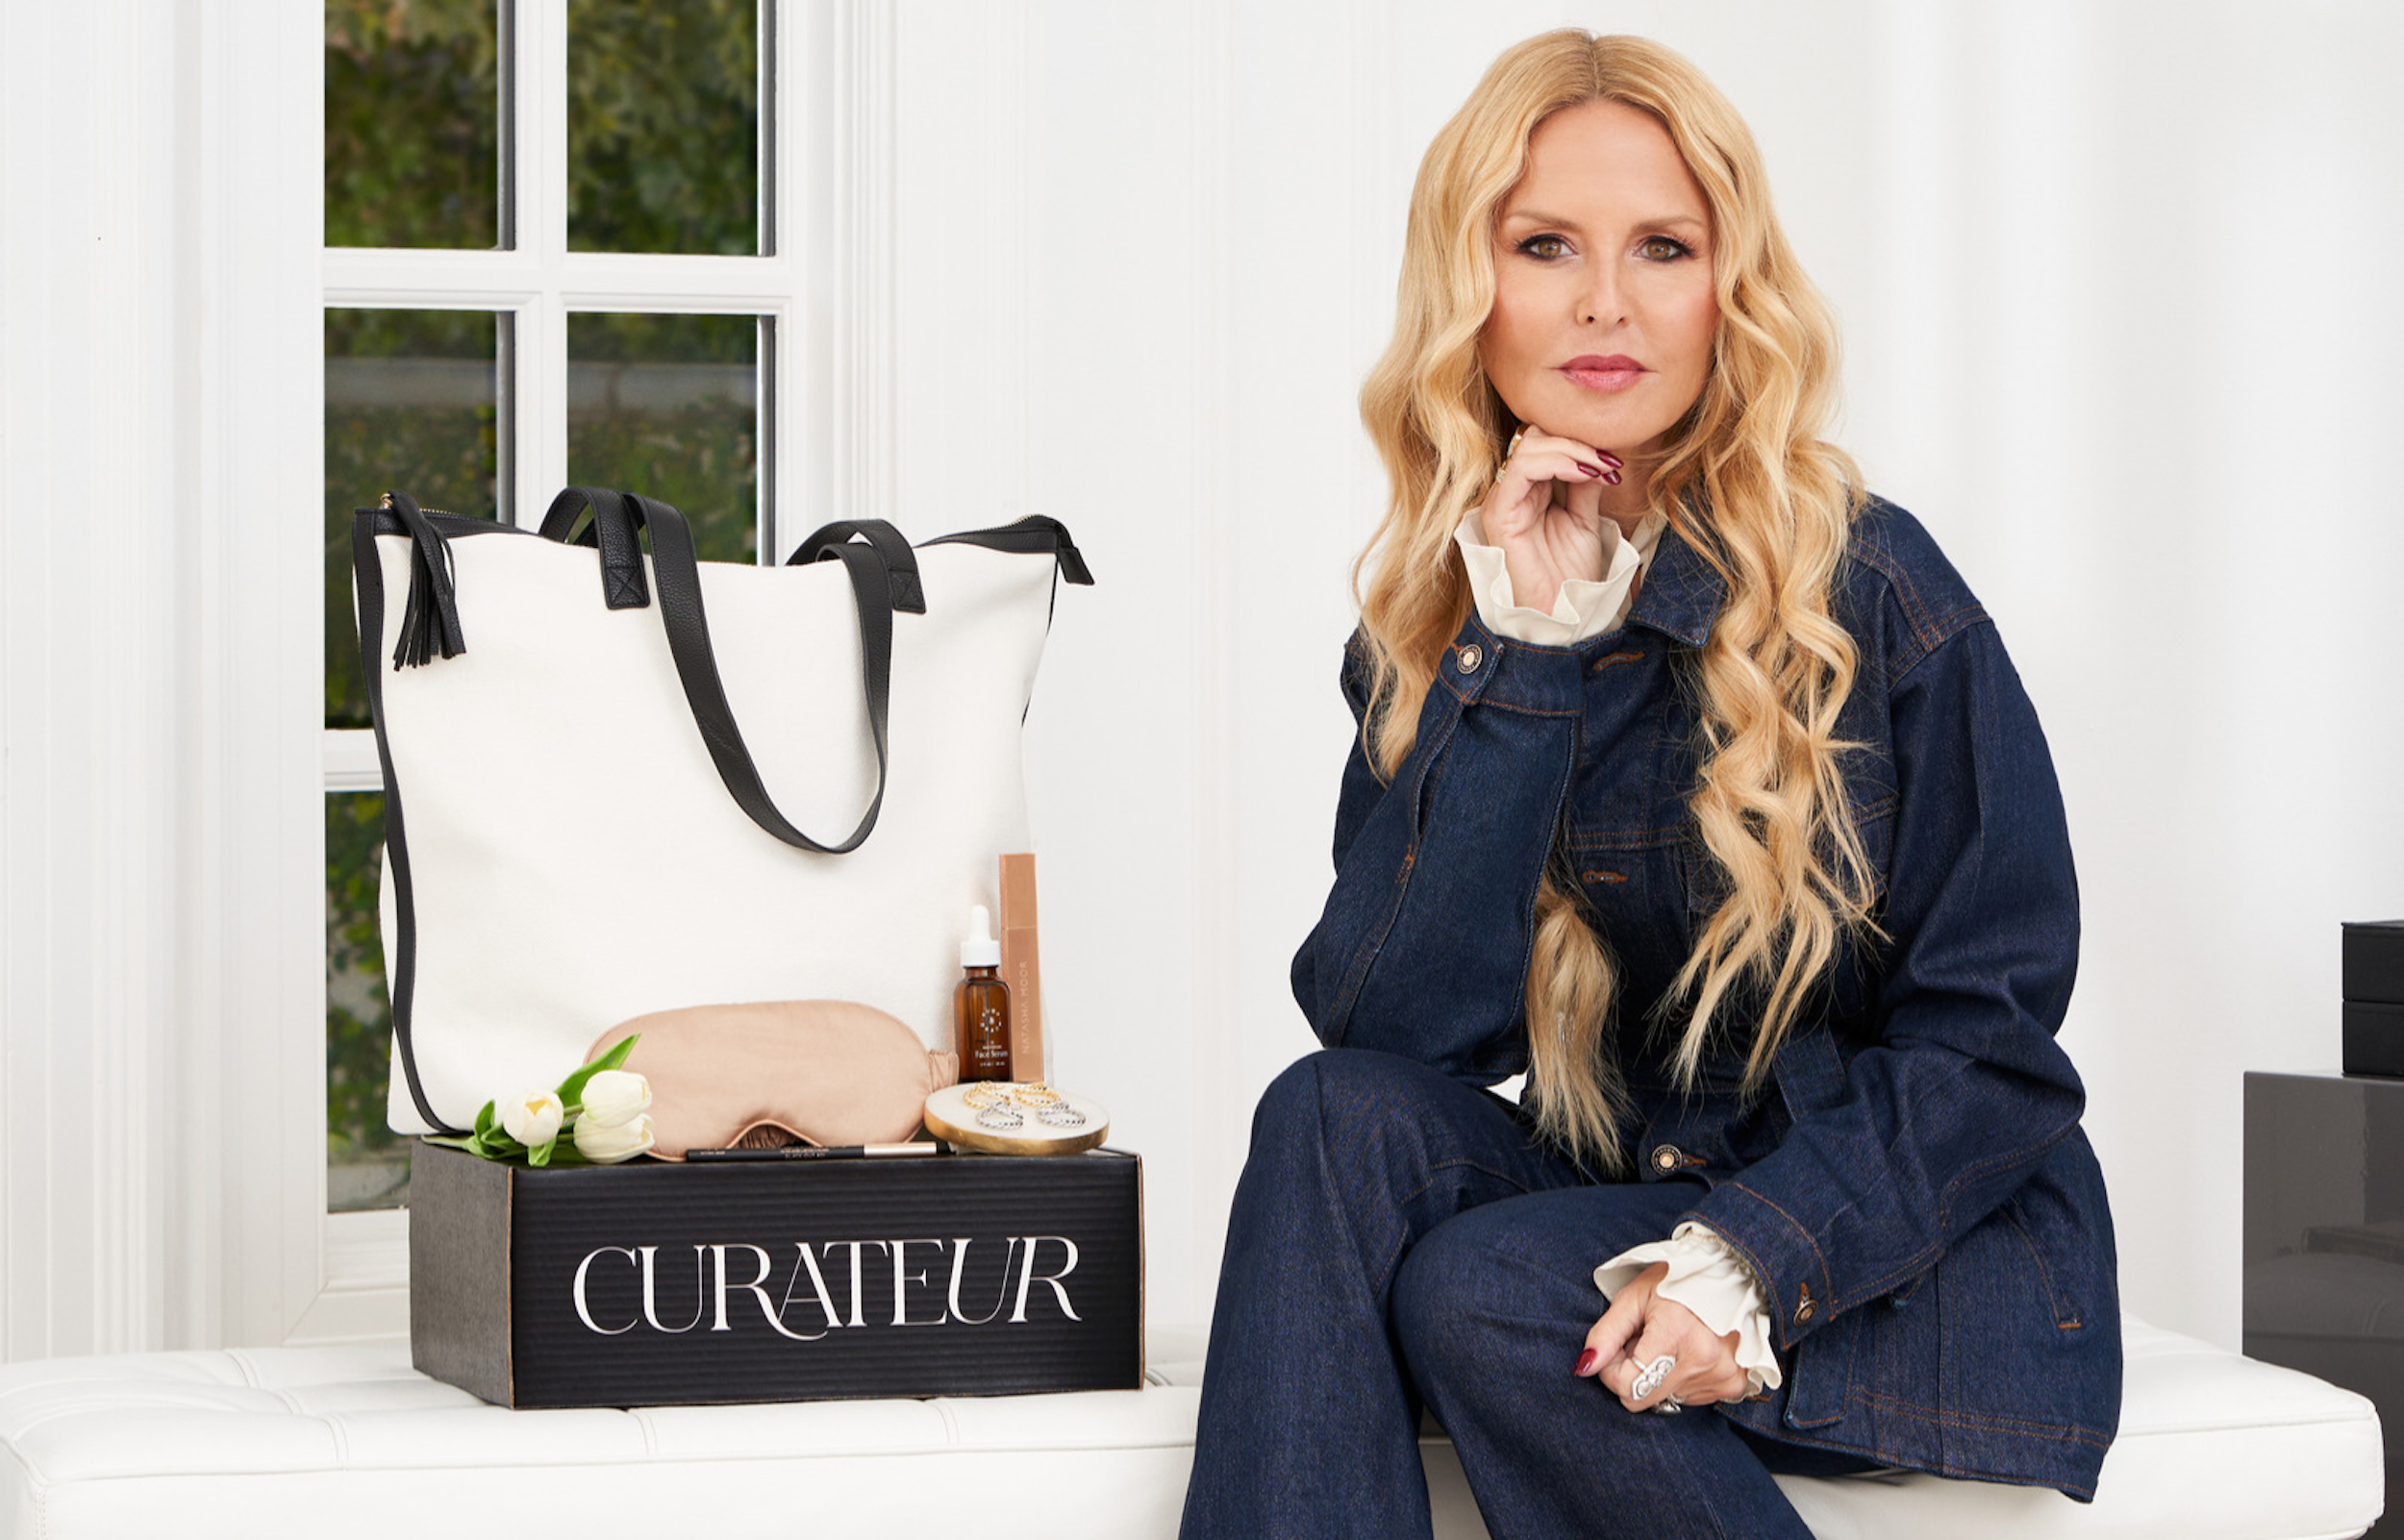 Rachel Zoe Spring Curateur Box Featured by Chic at Every Age